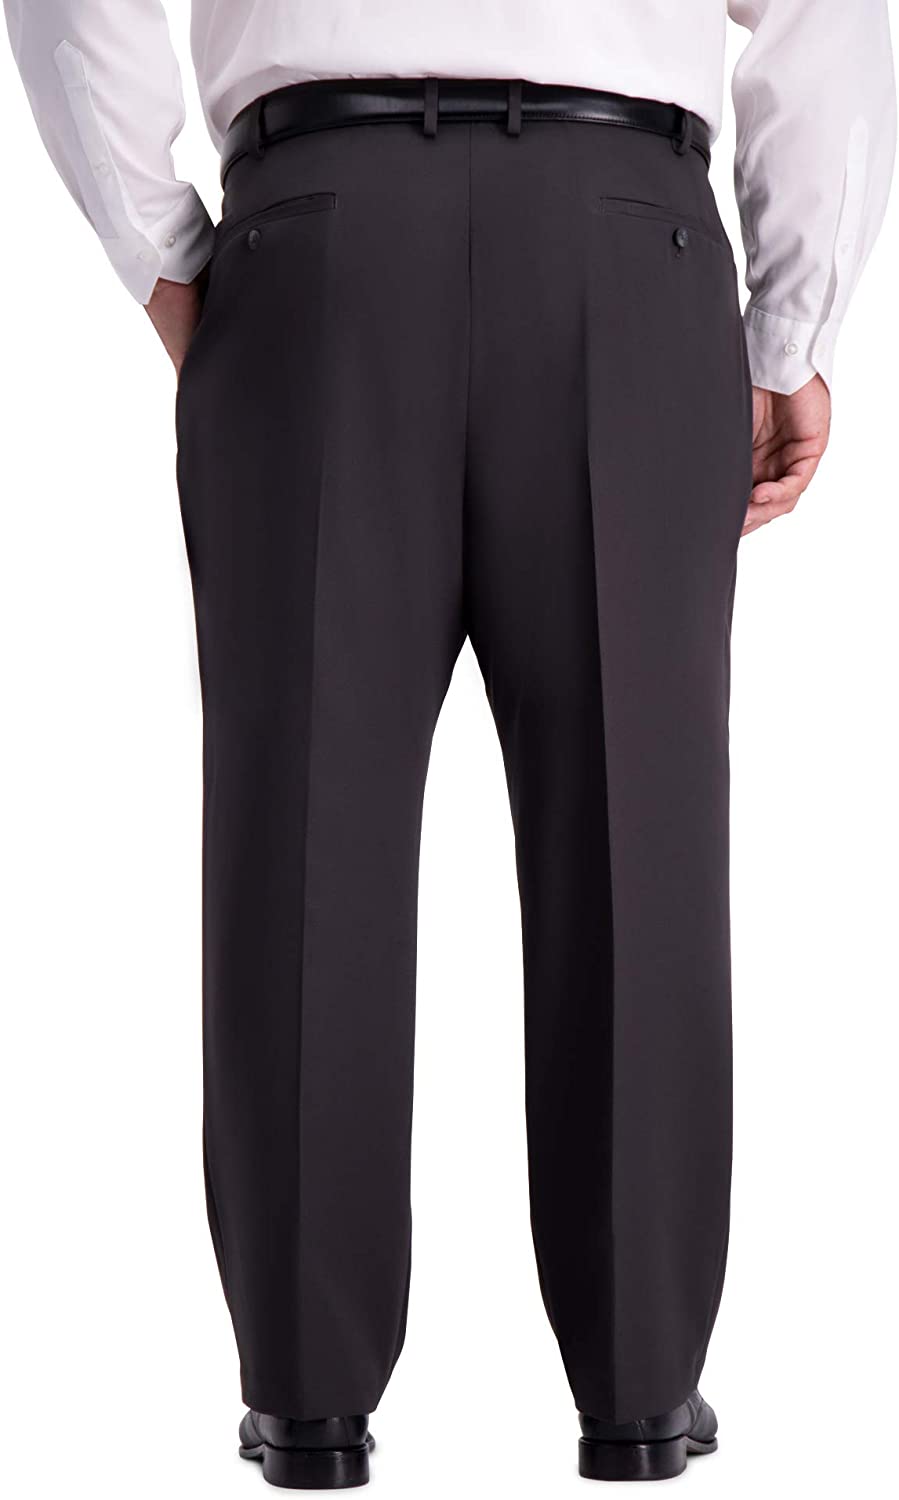 Haggar Mens Big  Tall Bt Active Series Stretch Classic Fit Suit Separate Pant - image 3 of 3